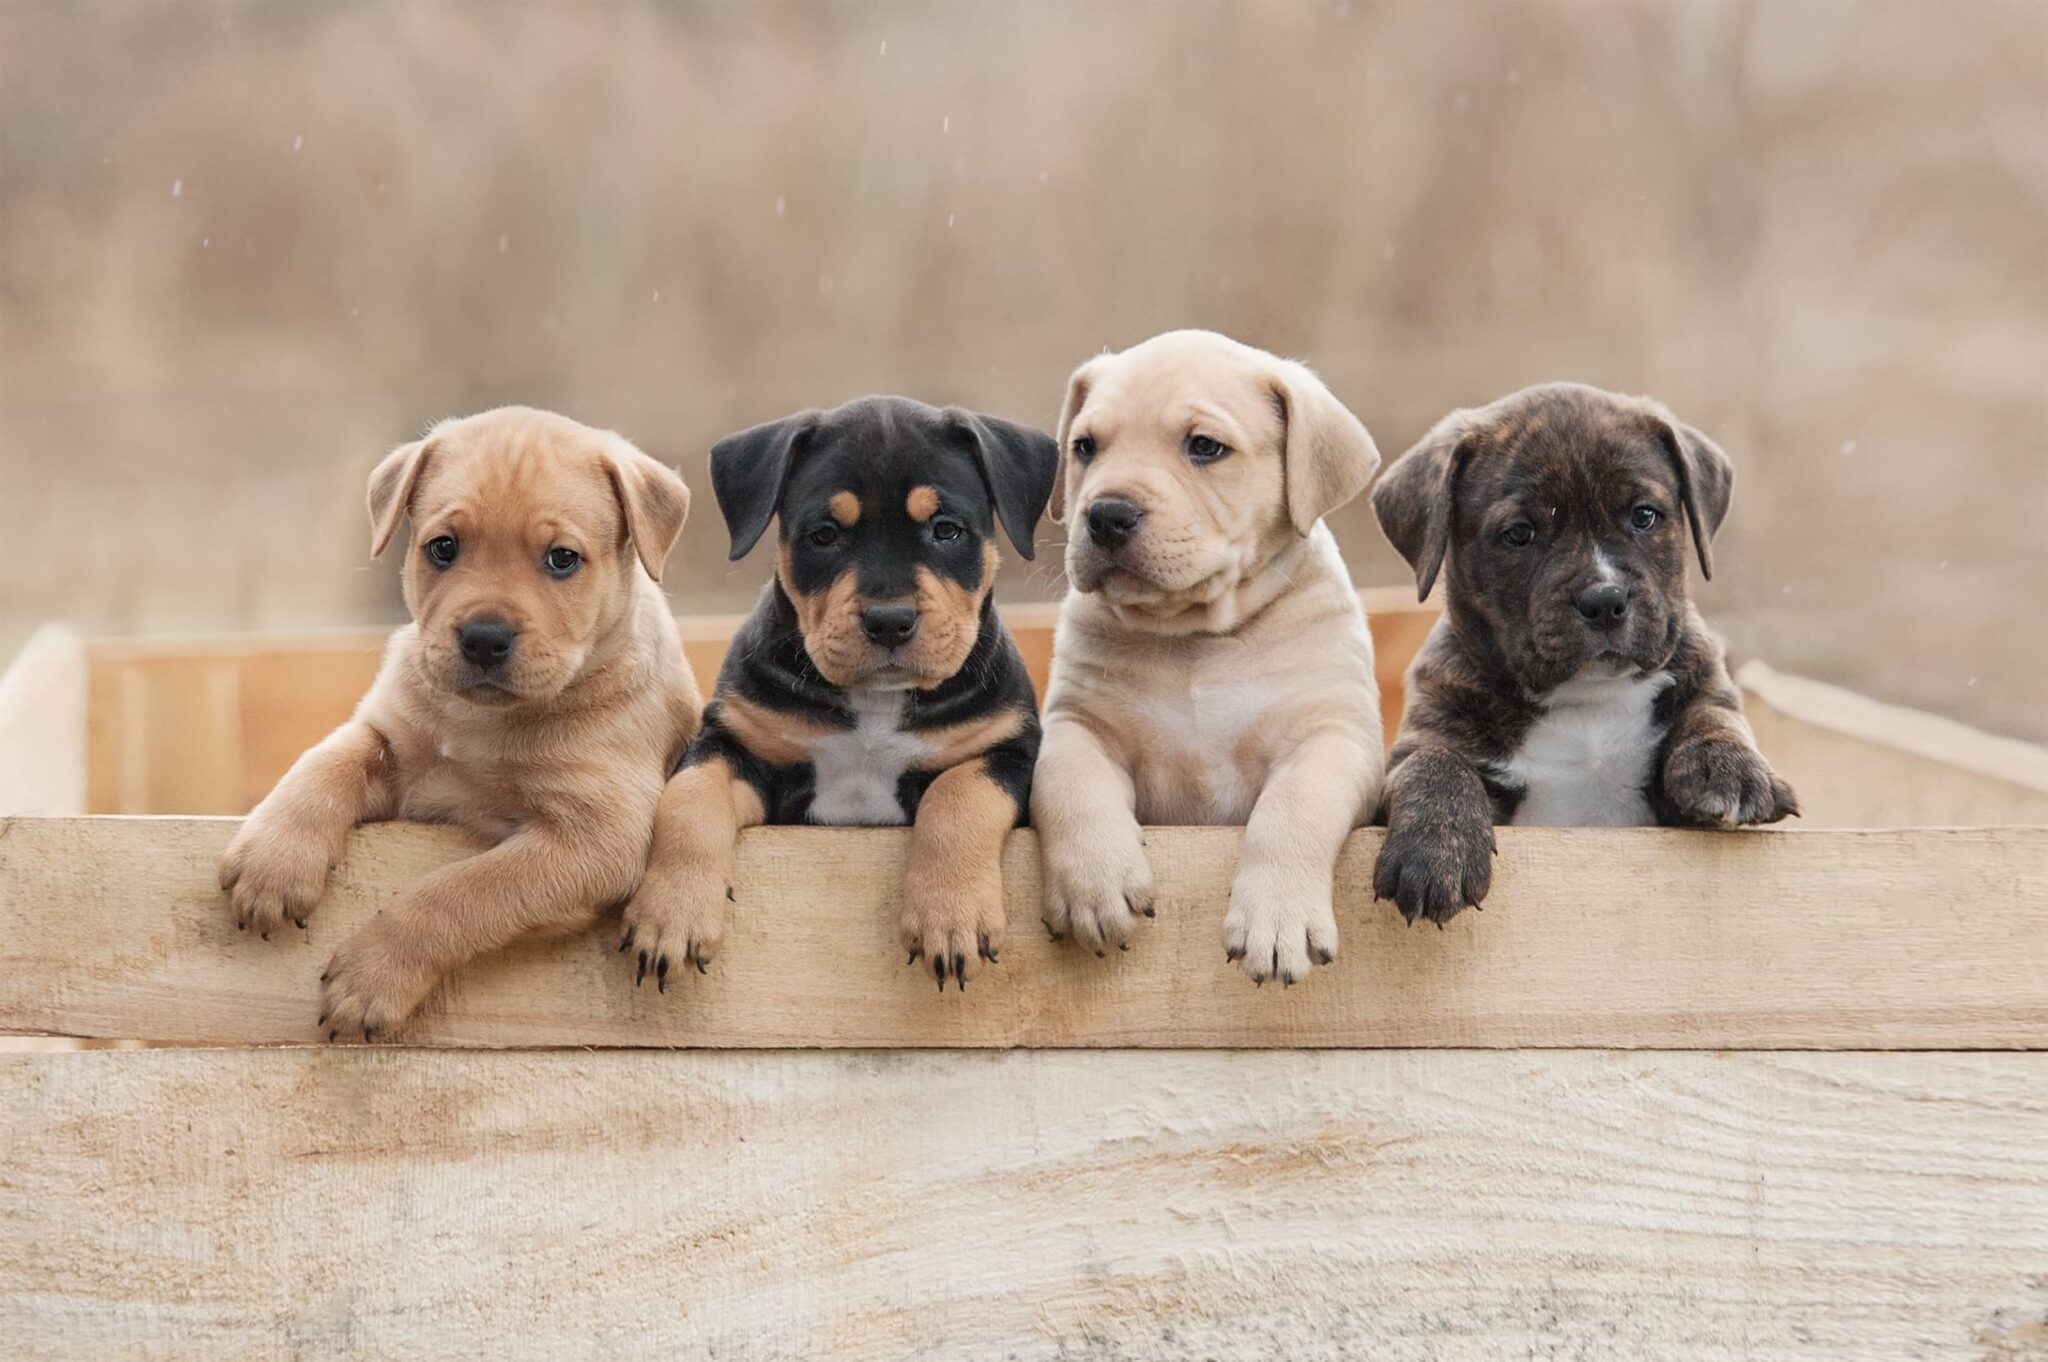 How to Find a Dog Breeder in Your Area?